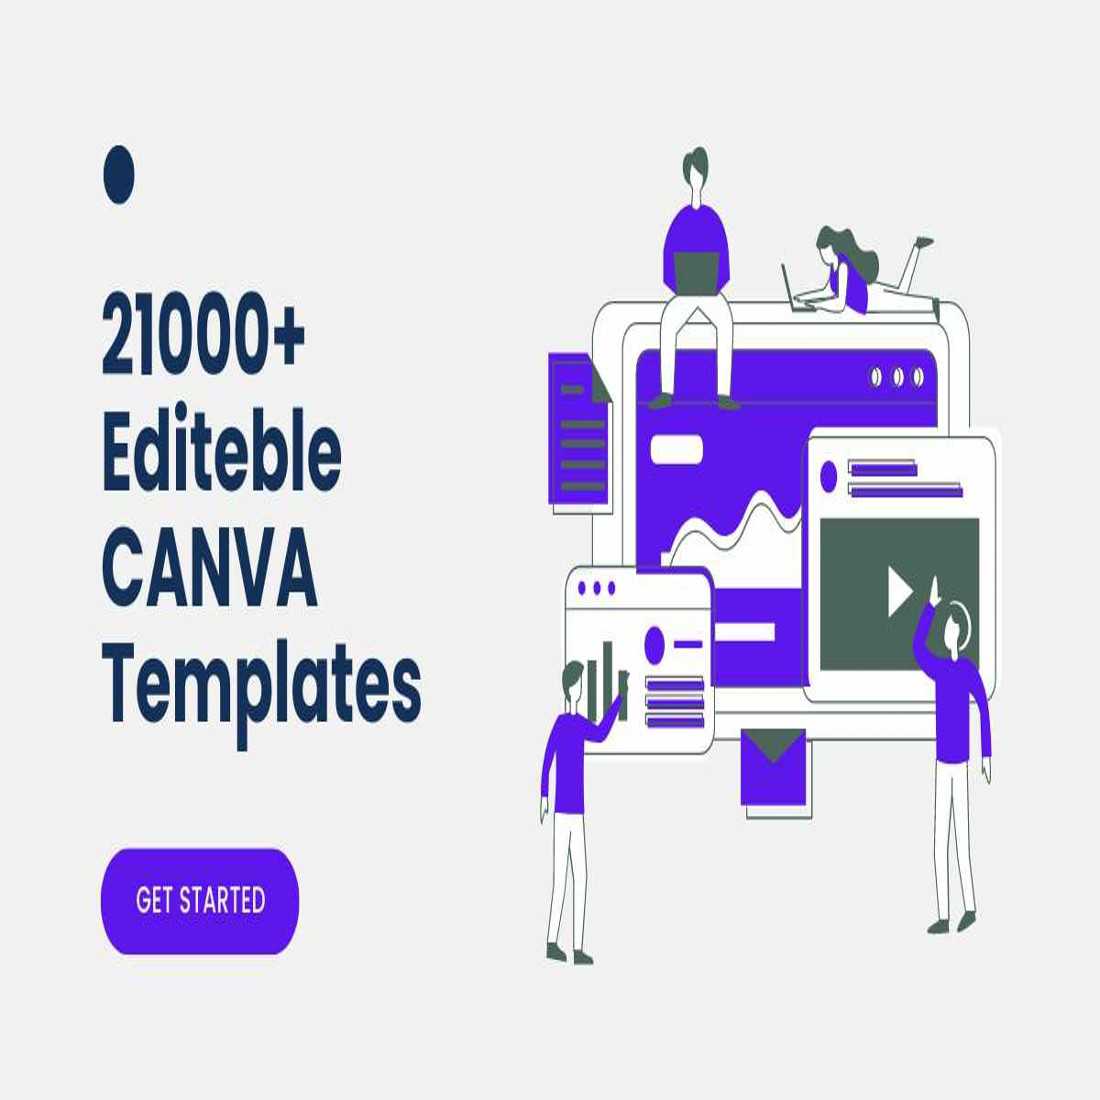 20000+Editeble CANVA Templates Bundle Reselling Rights cover image.